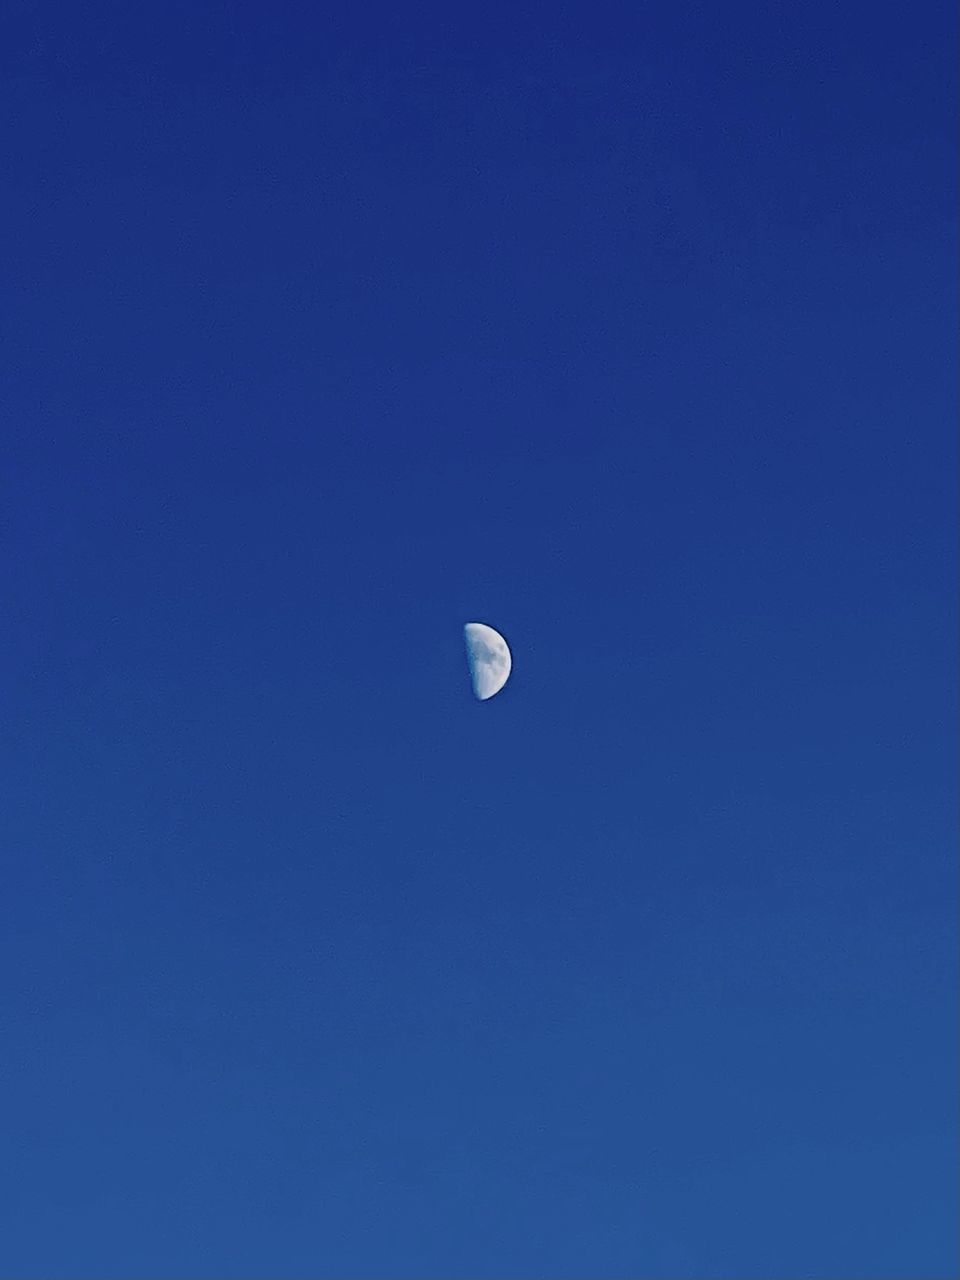 sky, moon, blue, space, clear sky, astronomy, crescent, low angle view, copy space, no people, nature, beauty in nature, night, scenics - nature, tranquility, half moon, tranquil scene, astronomical object, astrology, outdoors, planetary moon, cloud, idyllic